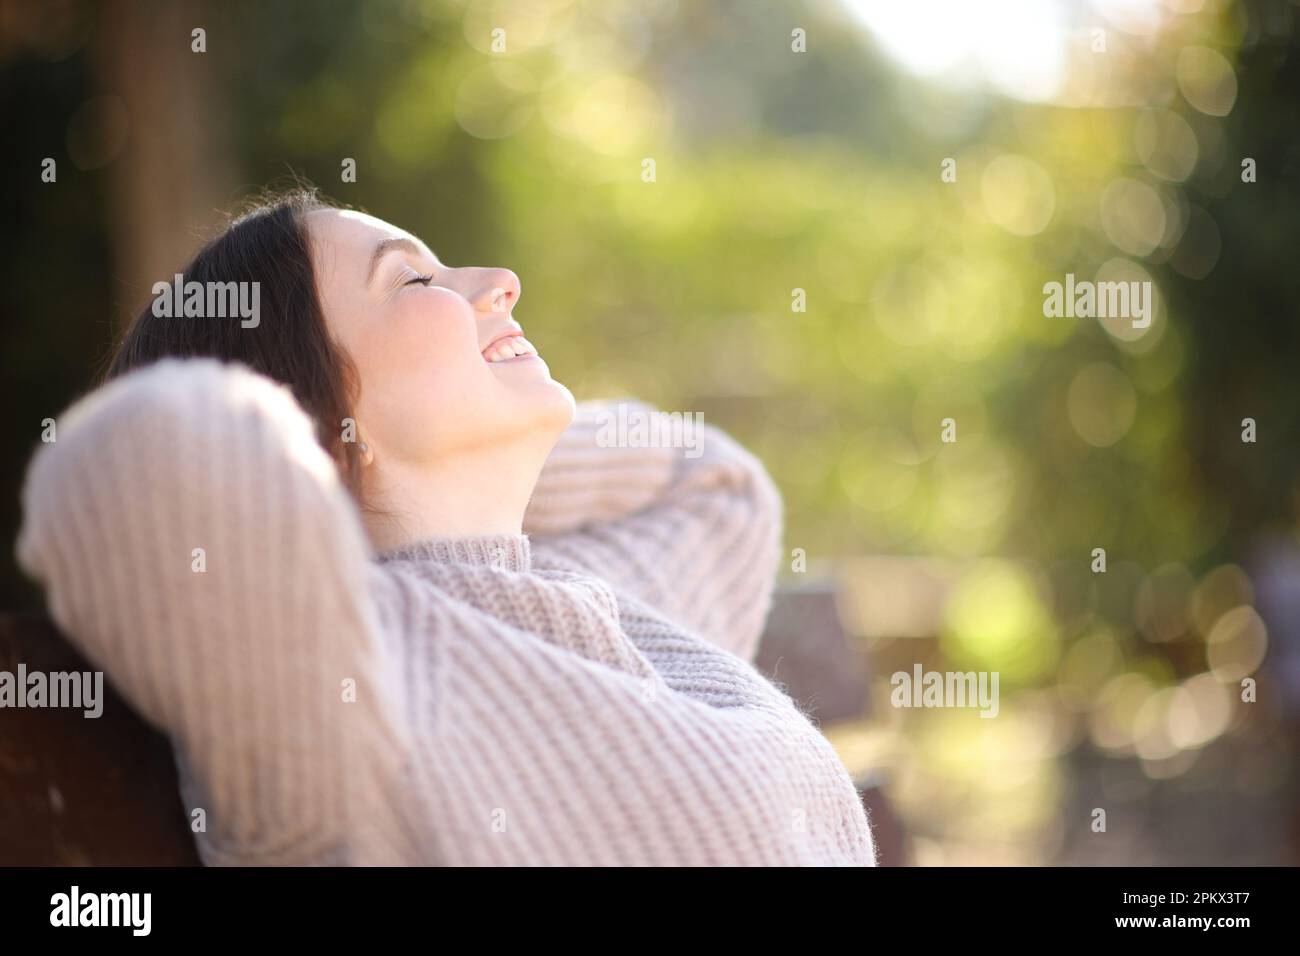 Profile of a relaxed woman resting sitting on bench in a park Stock Photo